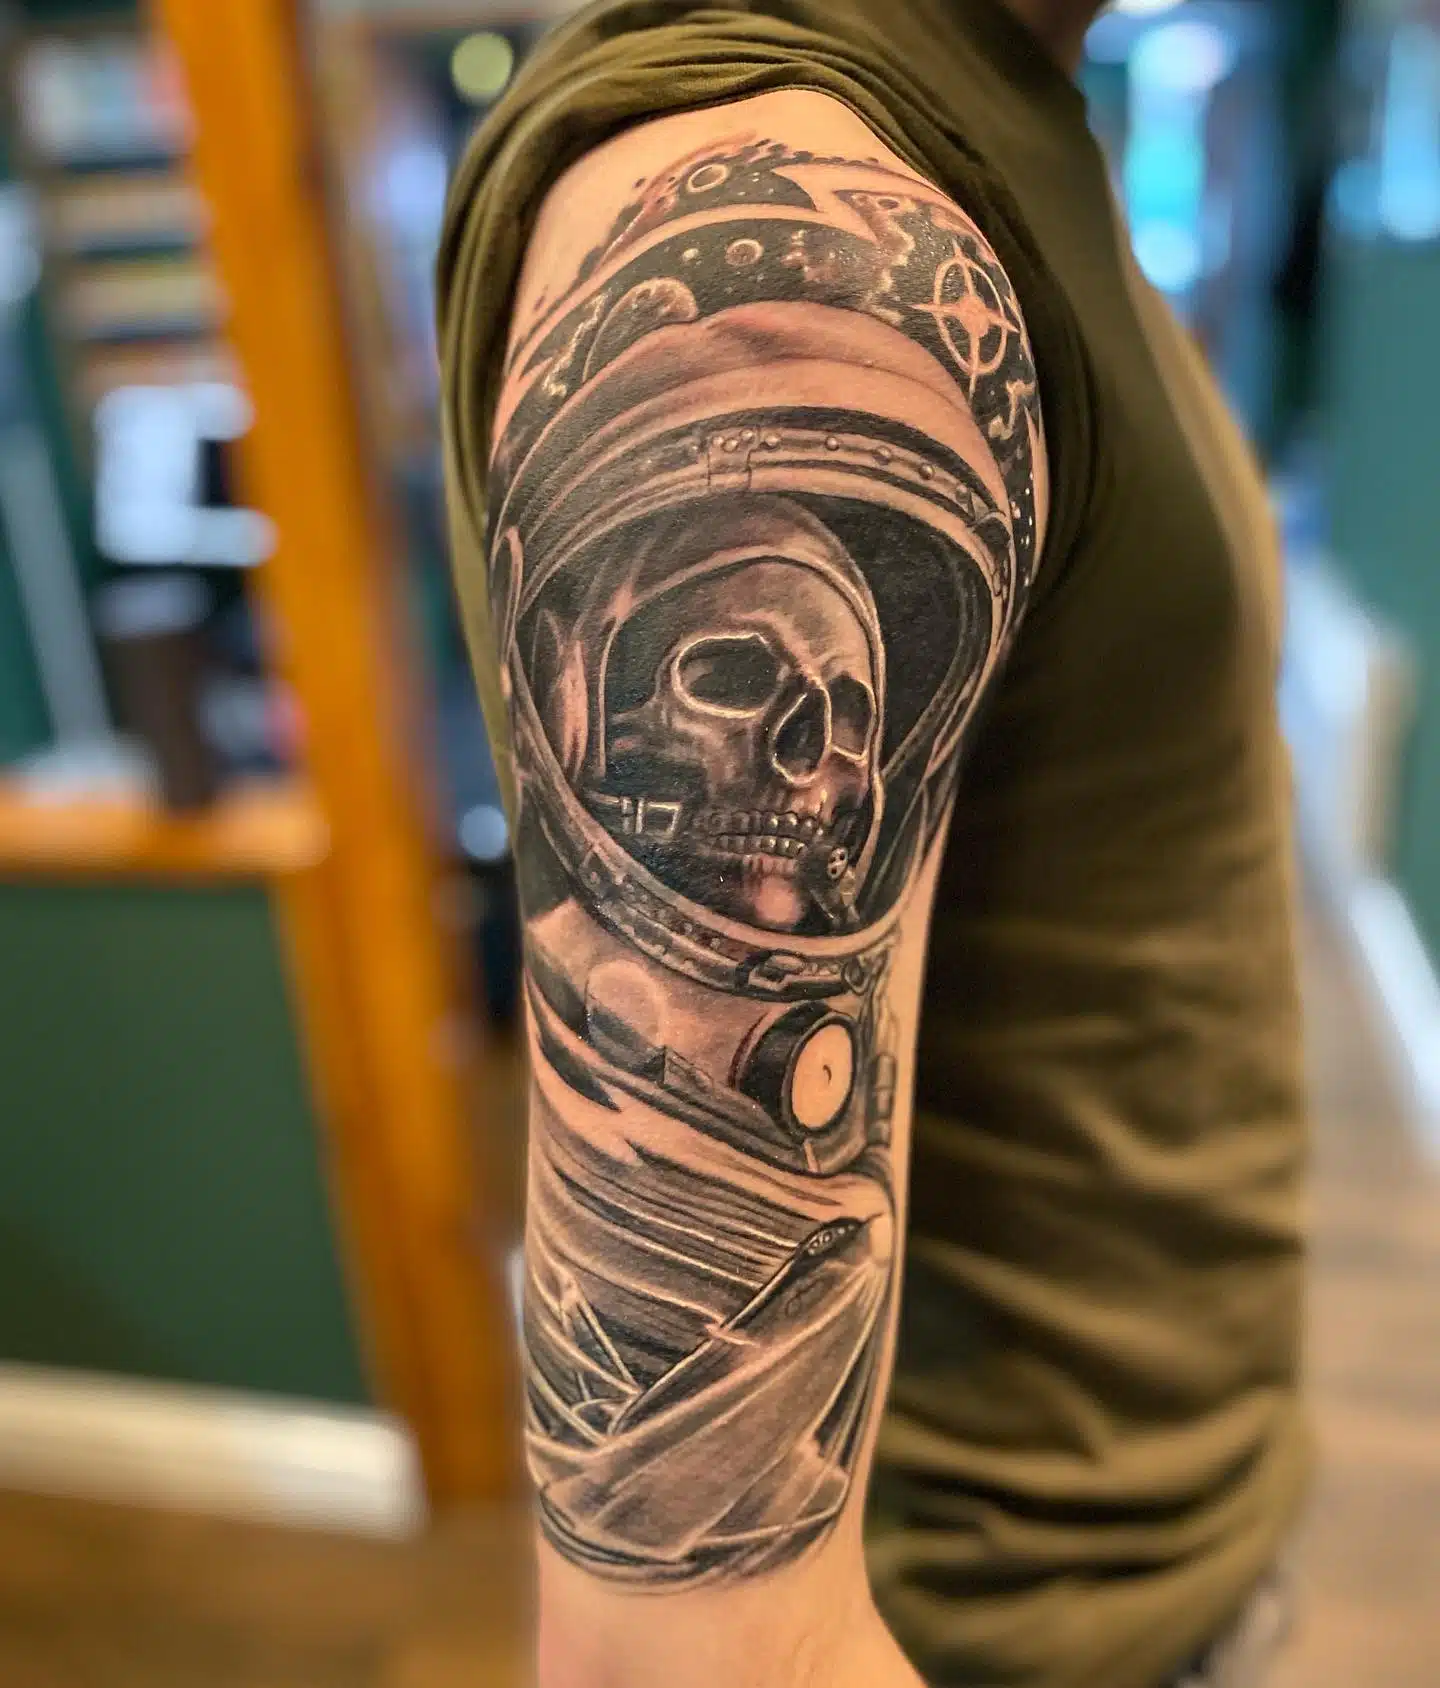 200+ Astronaut Tattoos That Let You Reach For The Stars